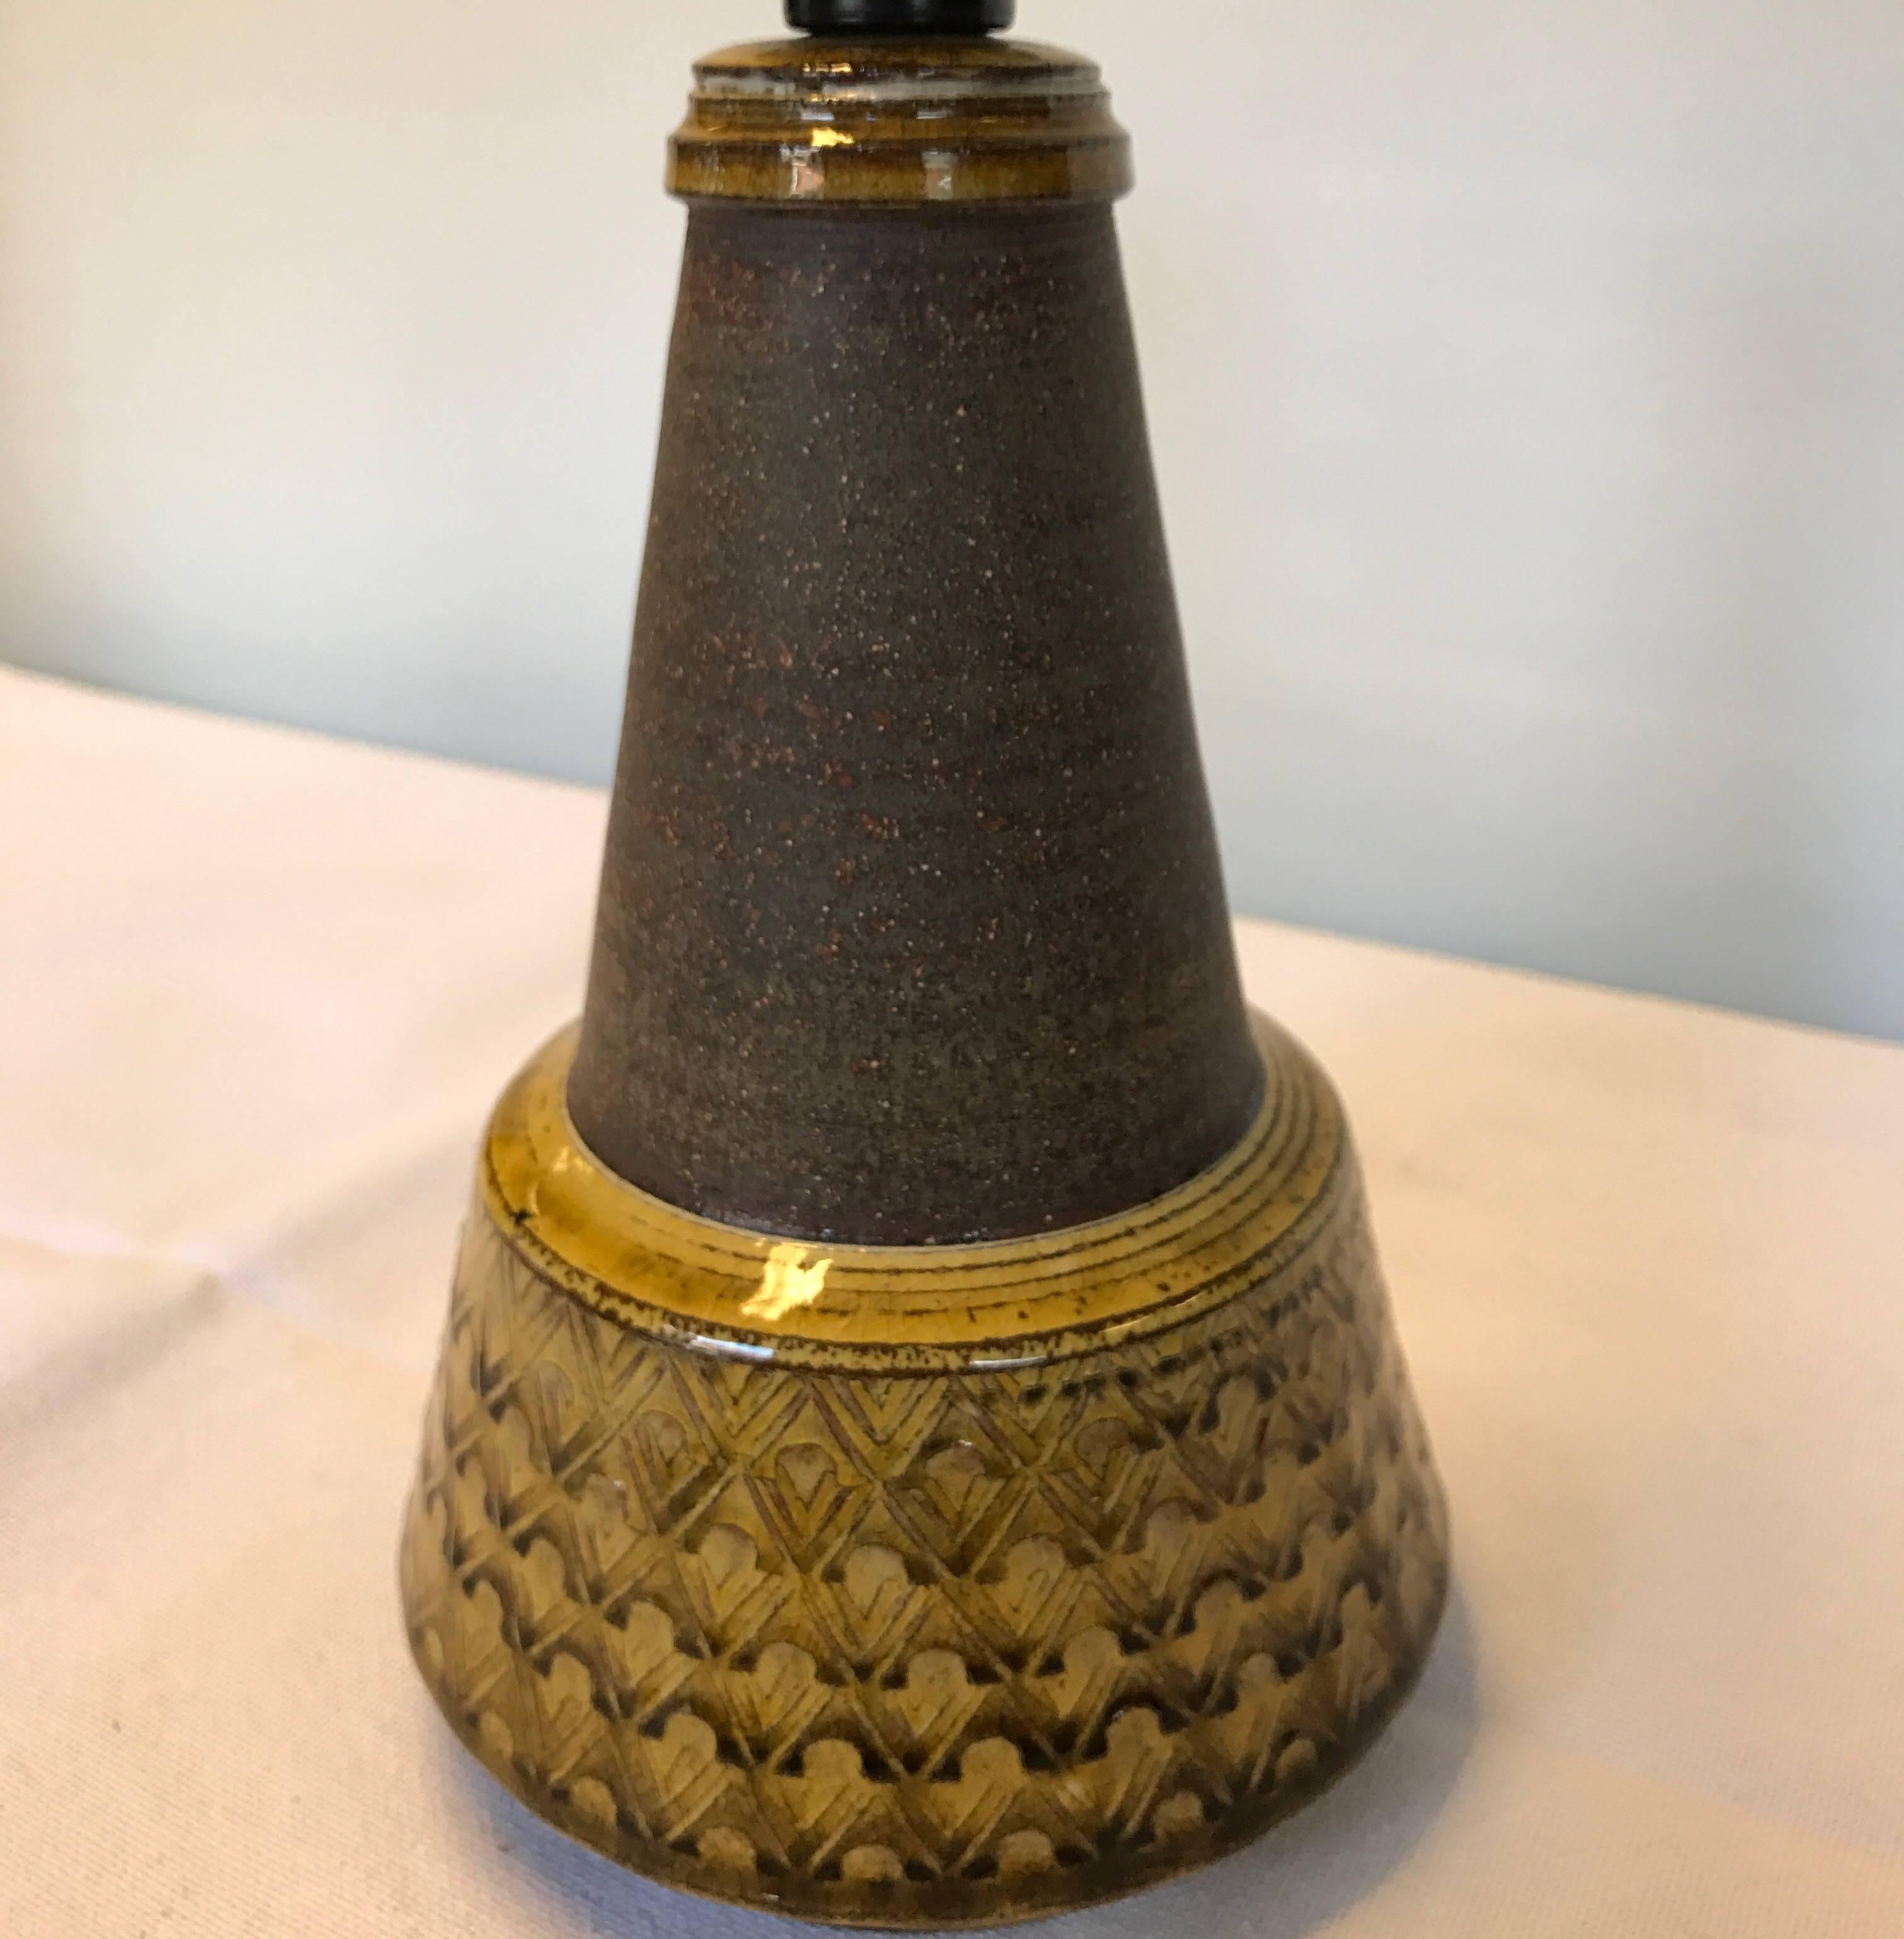 Small yellow and dark brown glazed stoneware table lamp designed by Nils Kähler, in excellent condition, but needs to be rewired for the right standards of destination. Measures: Diameter 12 cm and height with socket 25 cm.